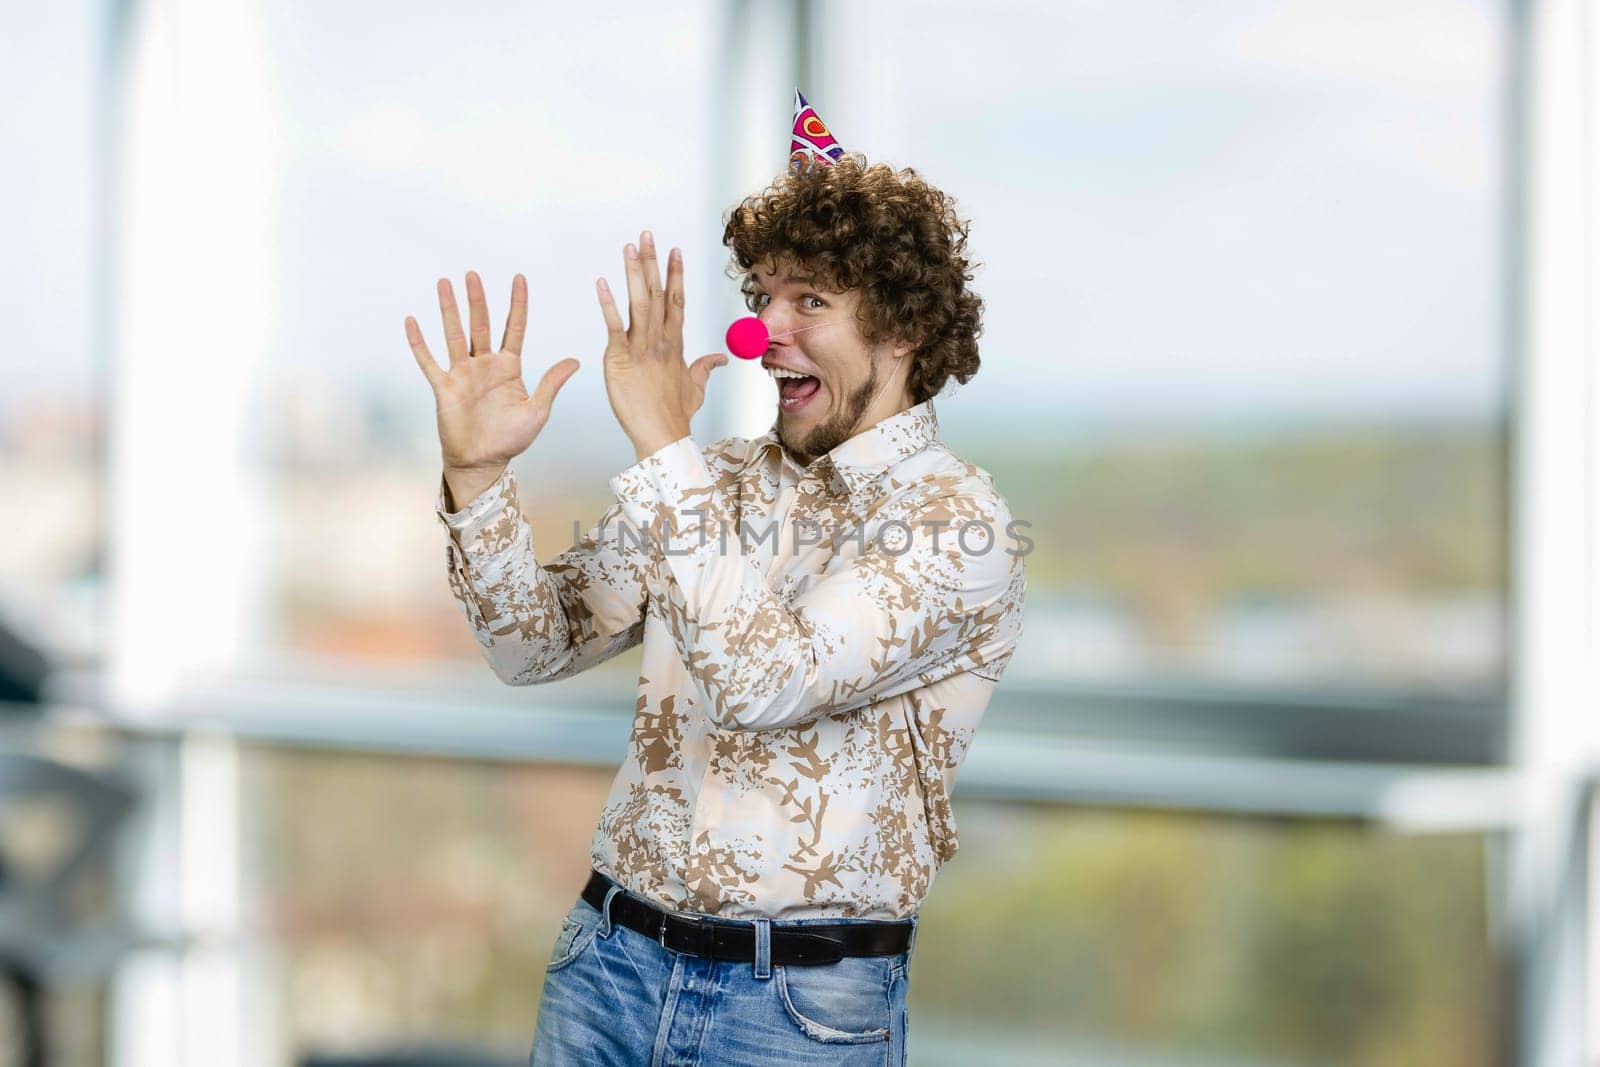 Happy young caucasian guy with curly hair wearing a clowns nose. Indoor window in the background.